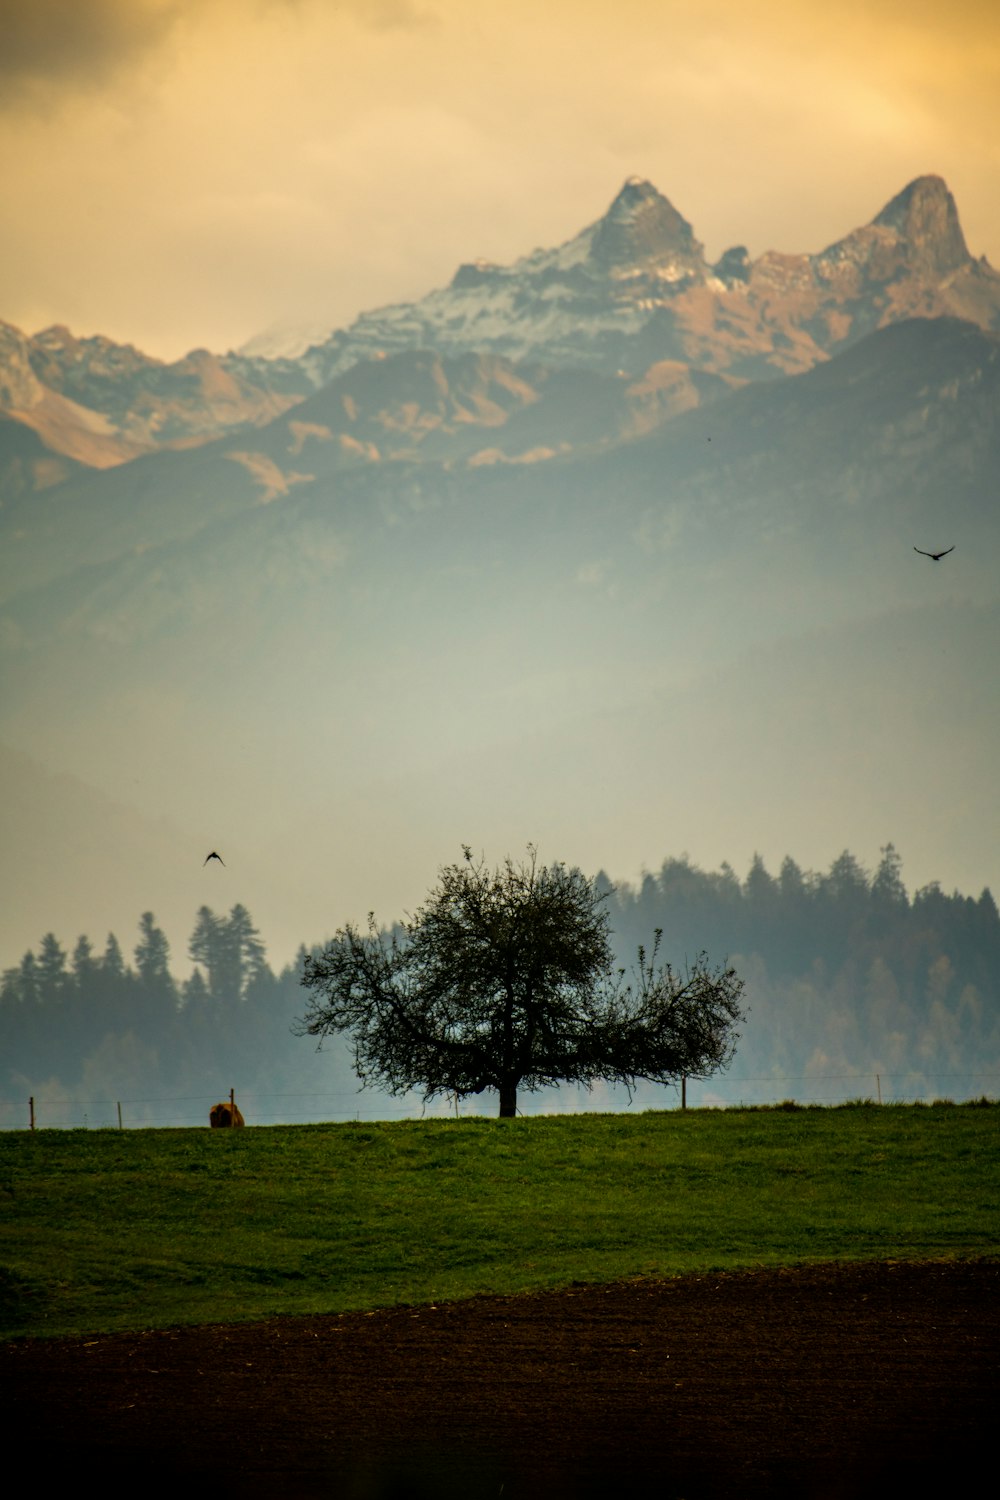 a tree in a field with mountains in the background